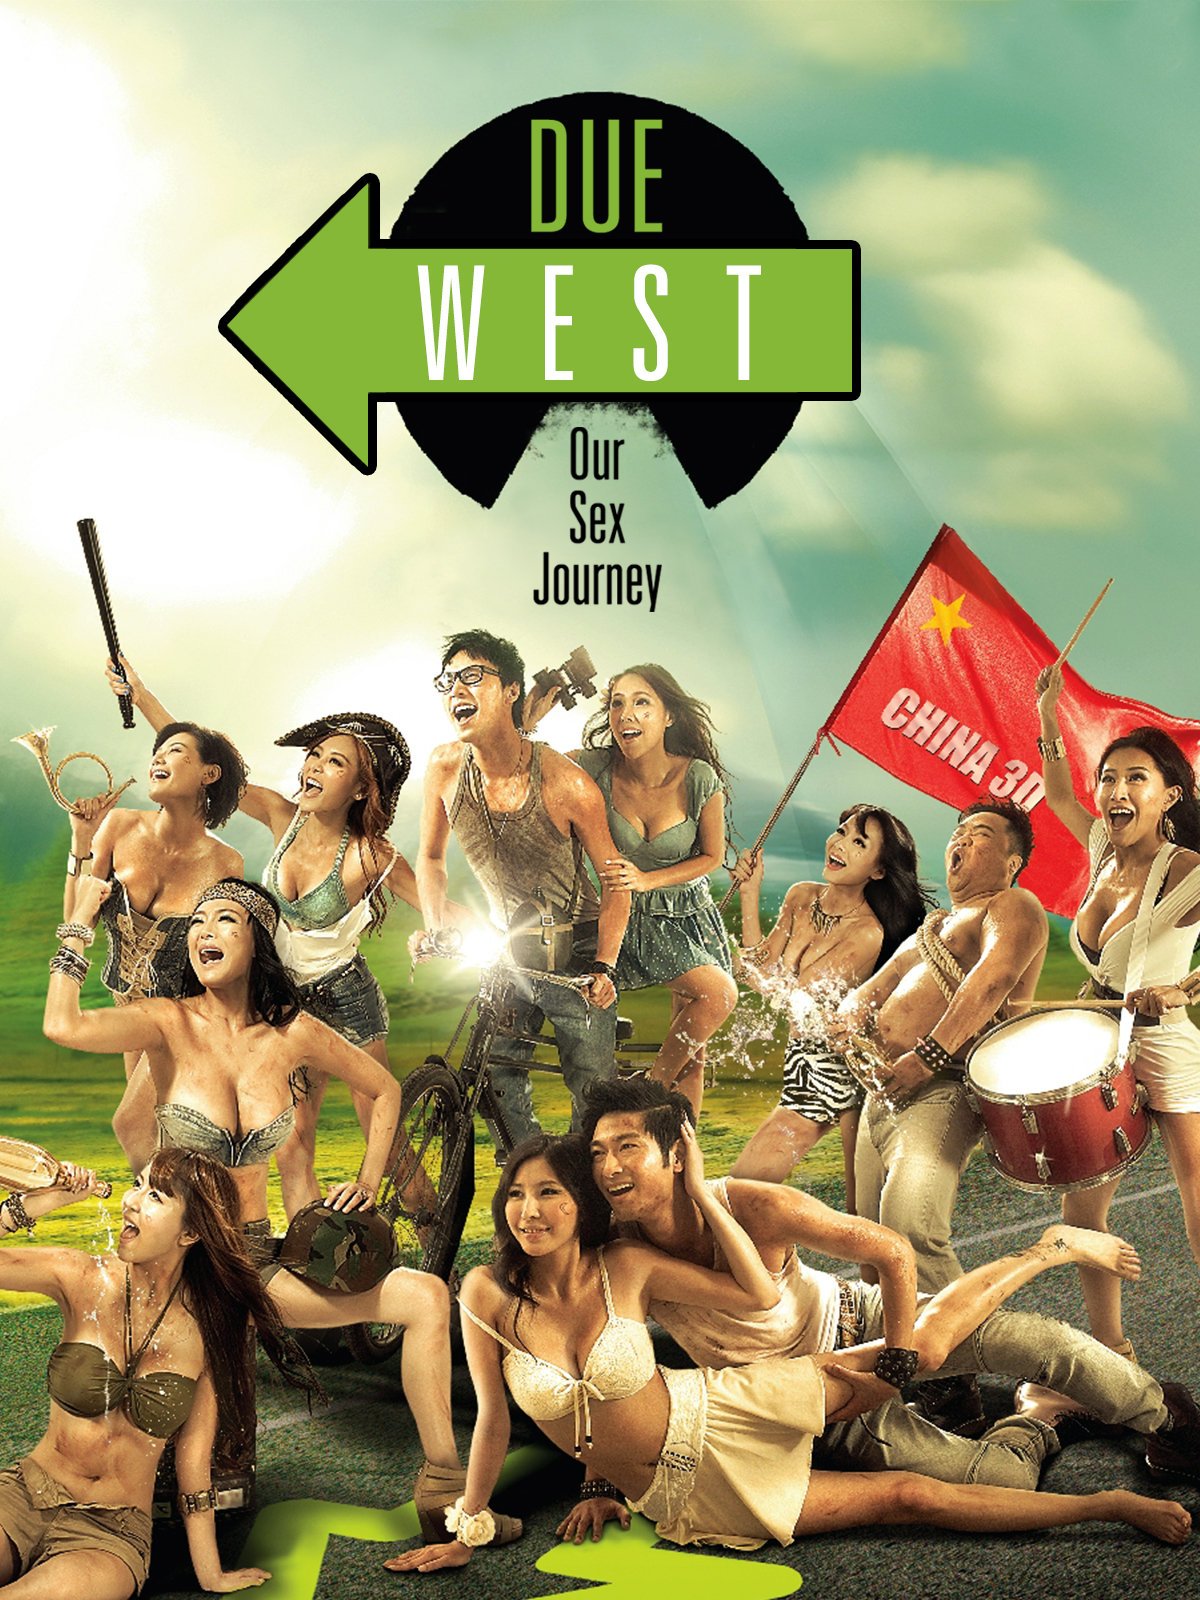 Due West: Our Sex Journey (2012) Screenshot 1